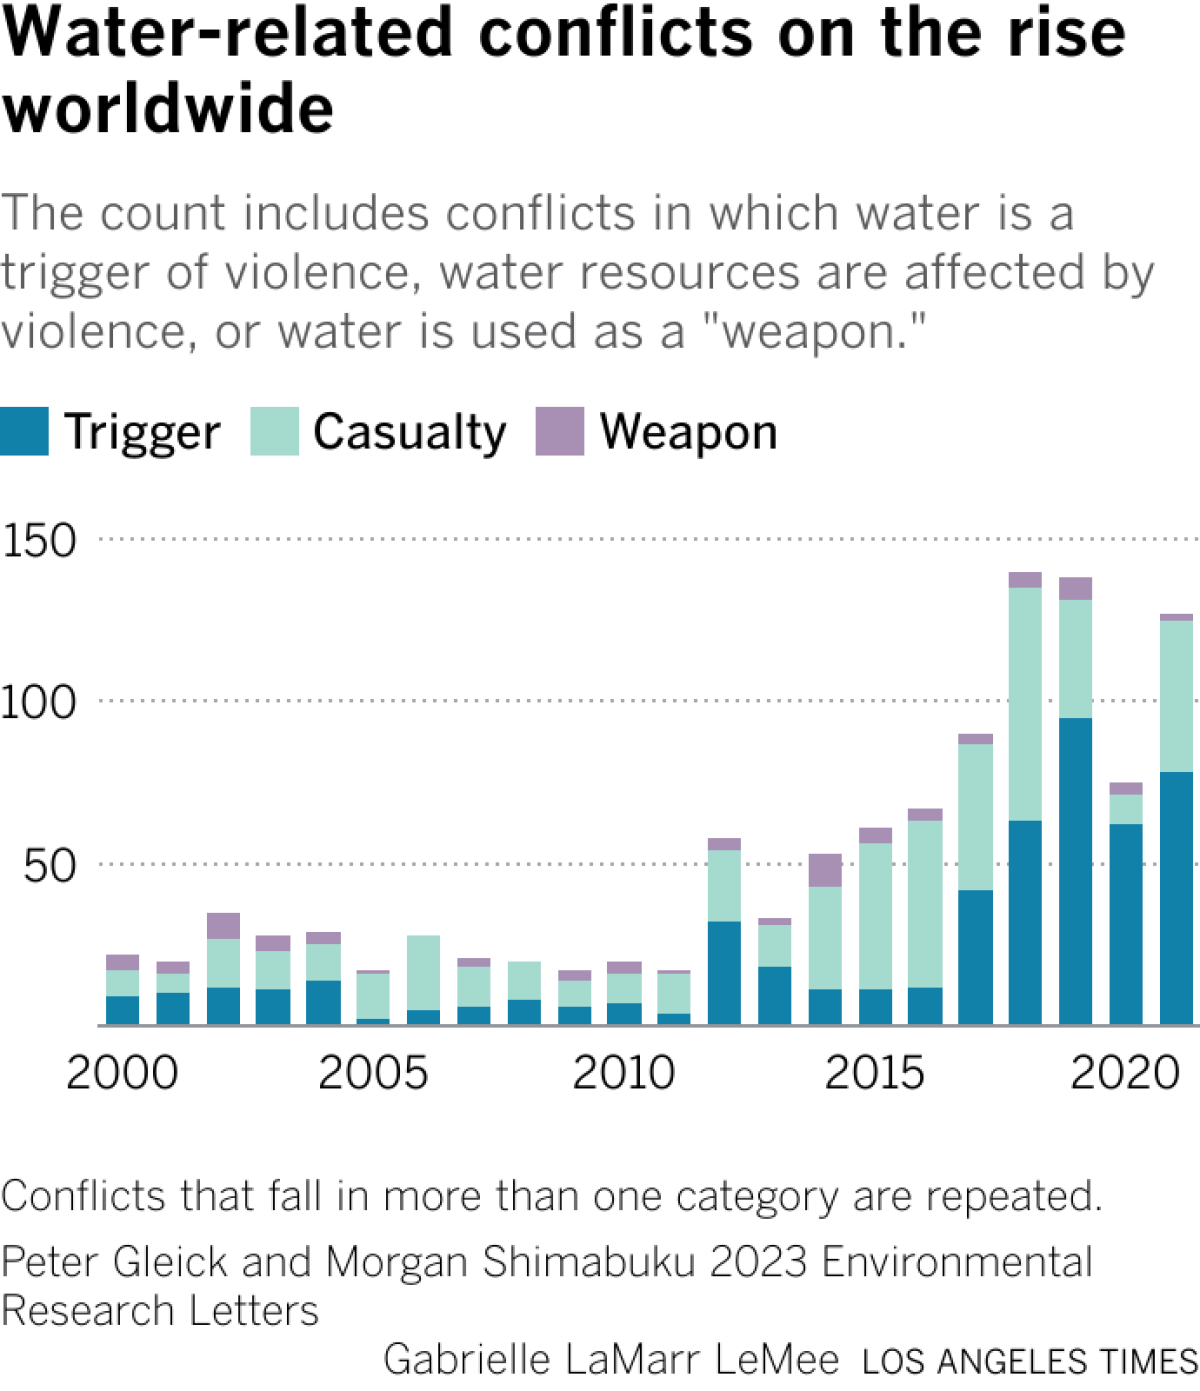 Stacked bar charts showing a dramatic increase in water-related conflicts from 22 in 2000 to 127 in 2021.